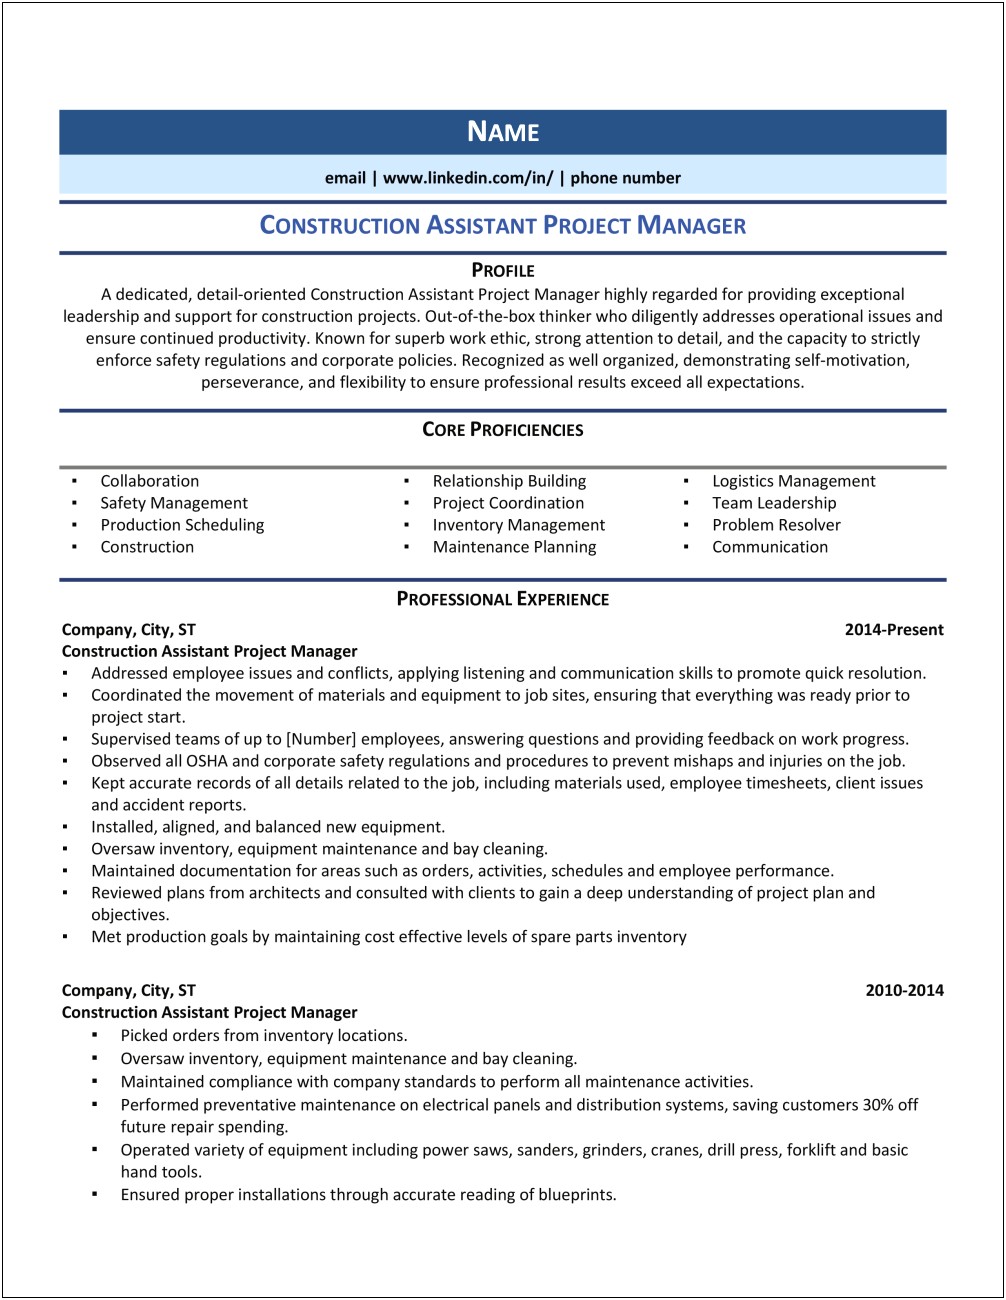 Sample Resume For Construction Company